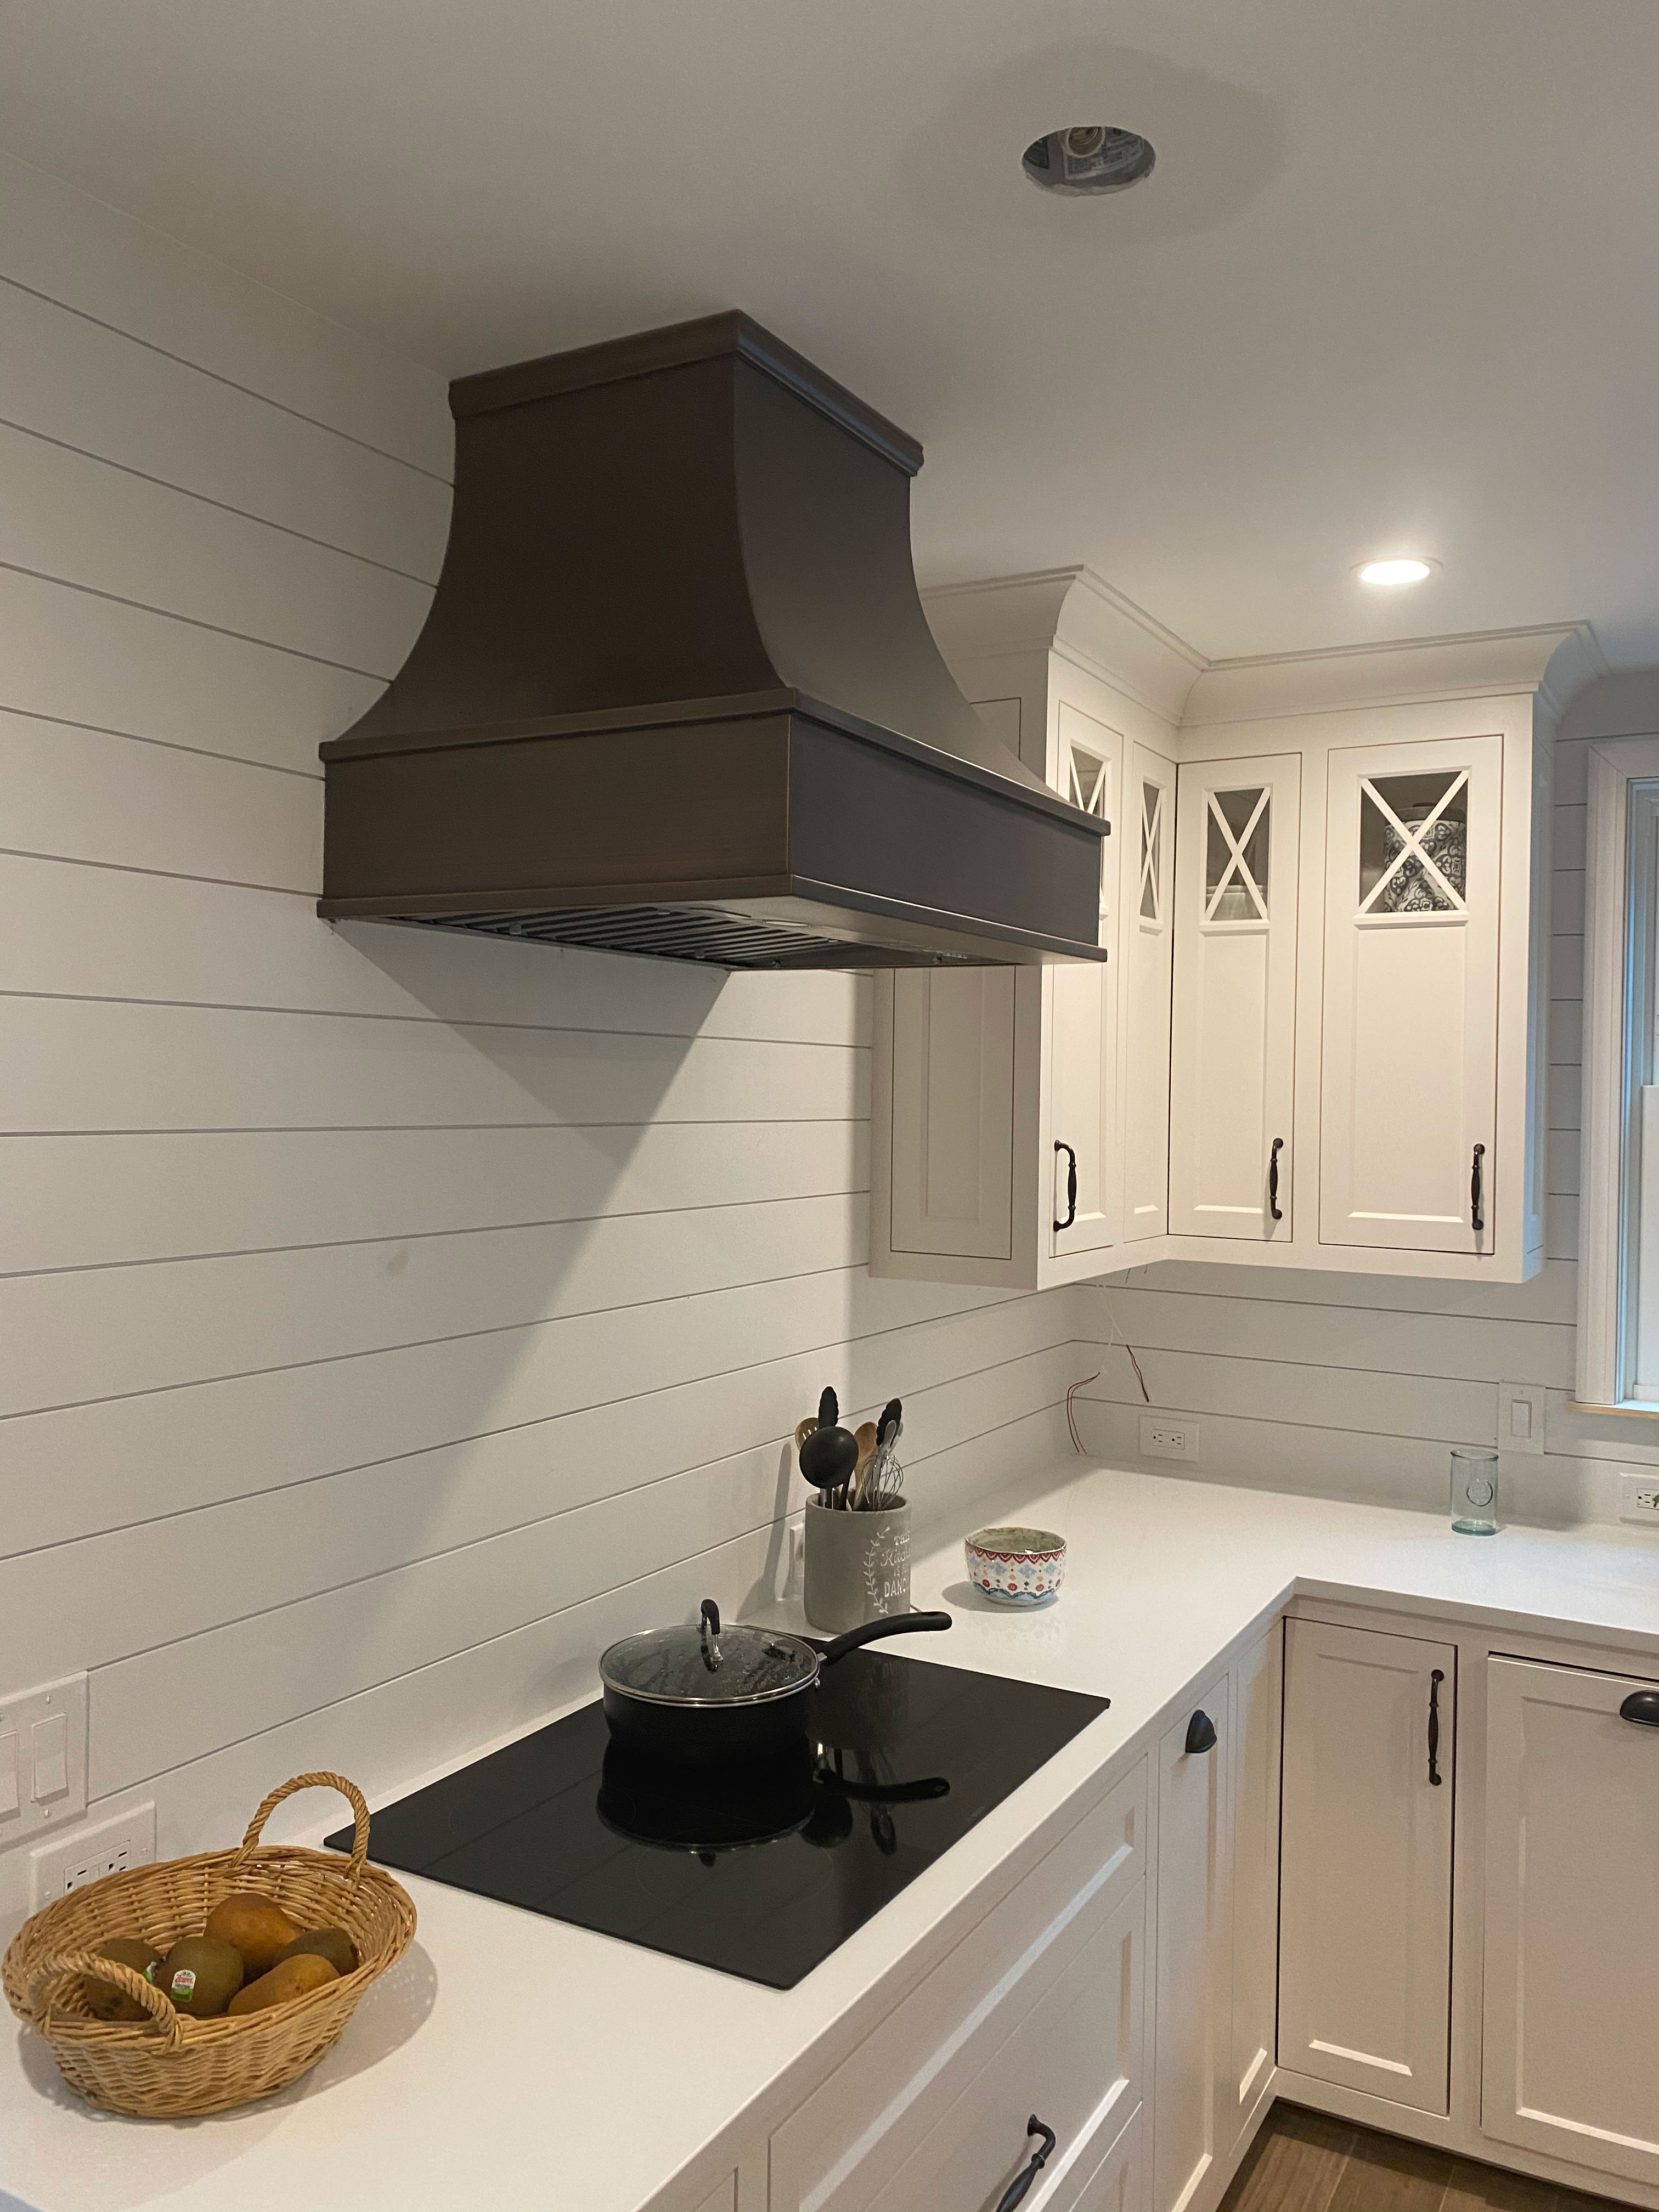 Modern kitchen with white cabinets, countertops, stunning brick backsplash, complemented by a stylish range hood